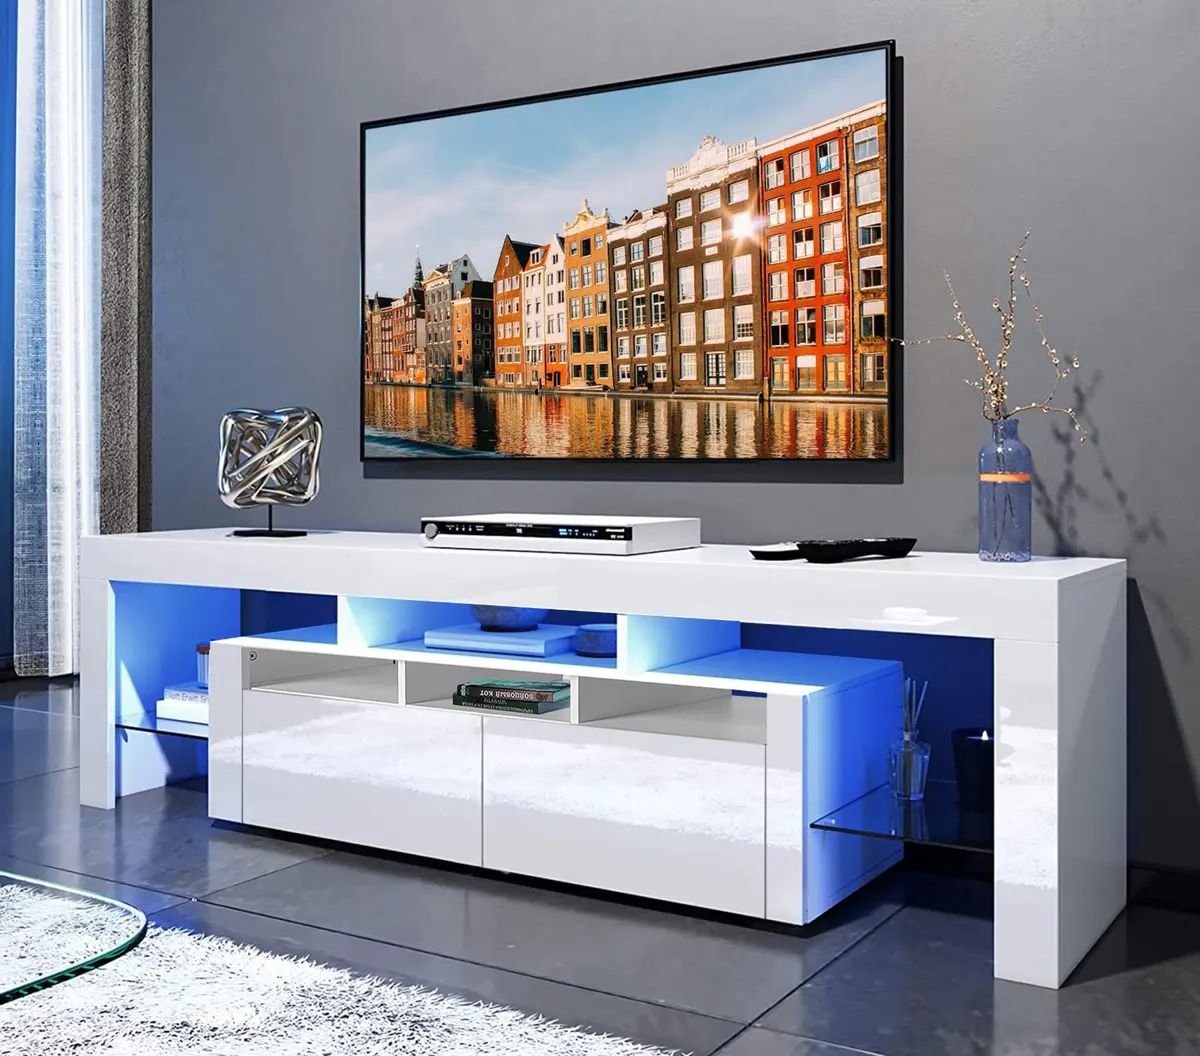 Modern Tv Unit Cabinet White Led Tv Stand High Gloss Doors Living Room Rgb  Light | Ebay Intended For Tv Stands With Lights (View 5 of 20)